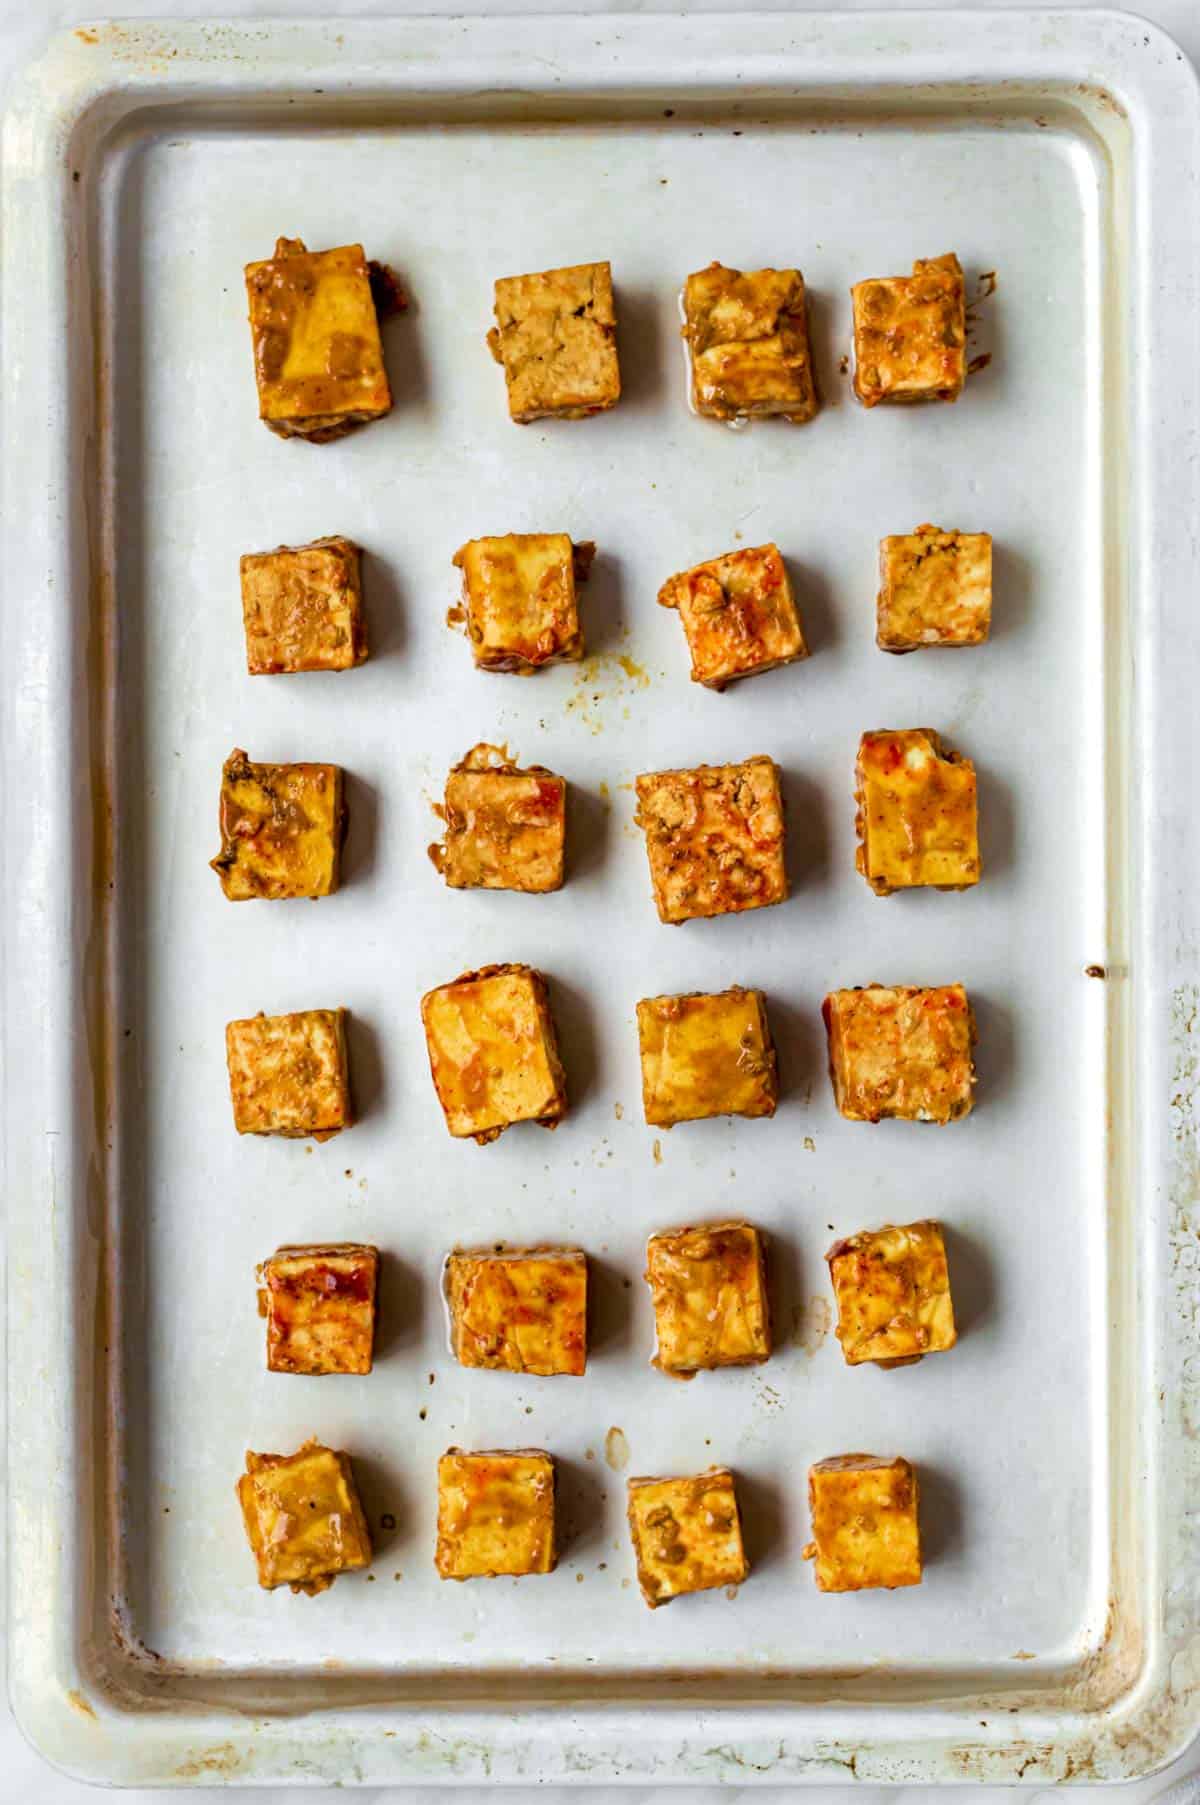 Tofu cubes on a baking tray, about to be baked.